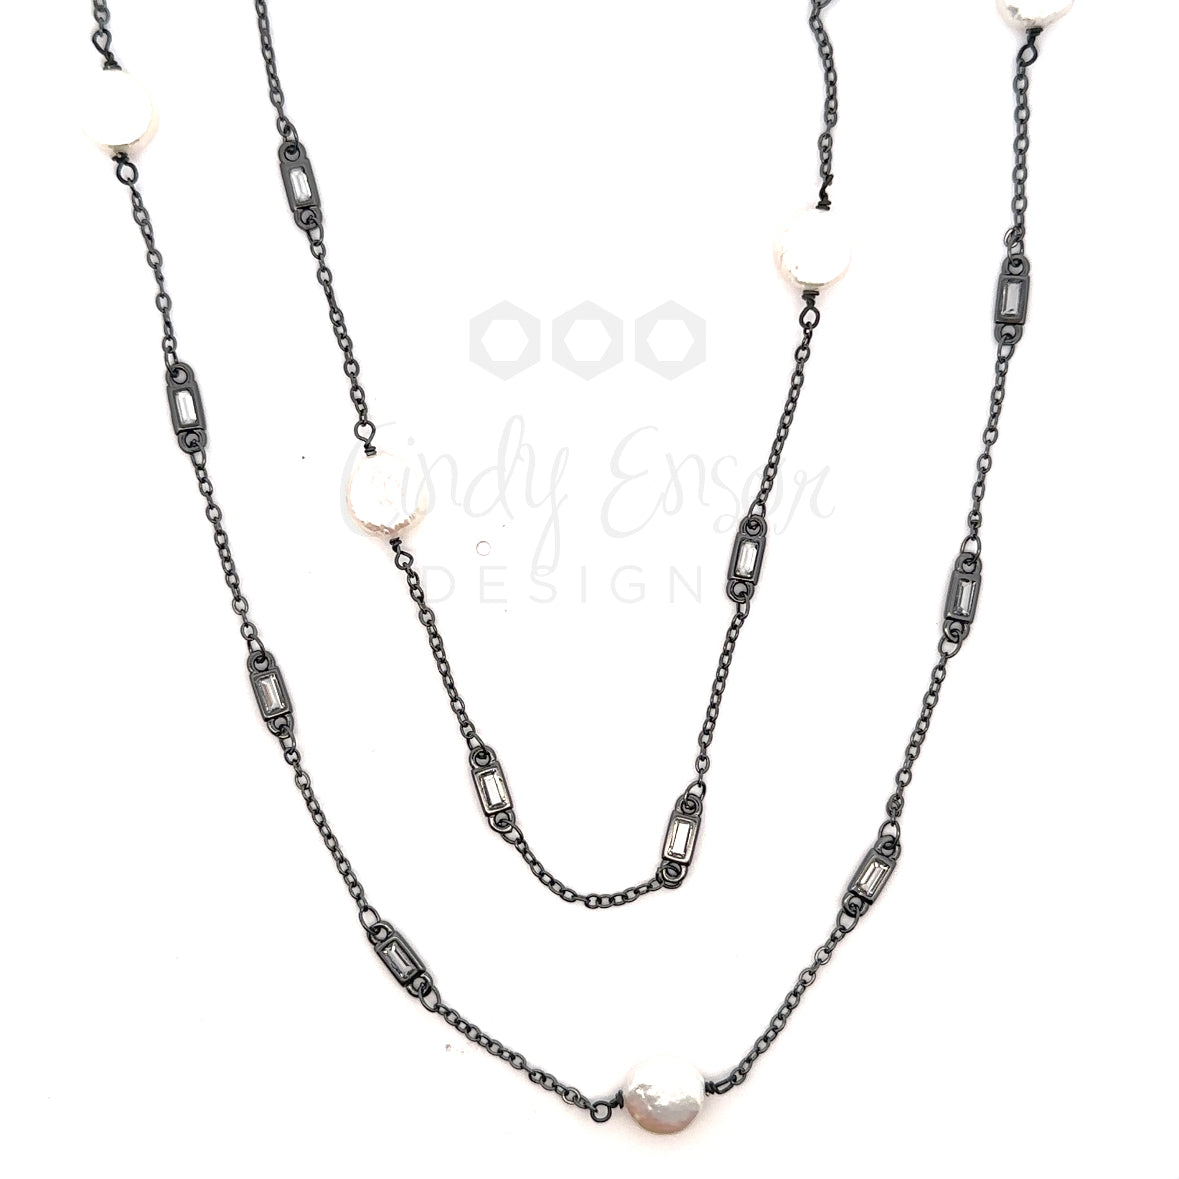 Long Black Crystal and Button Pearl Necklace